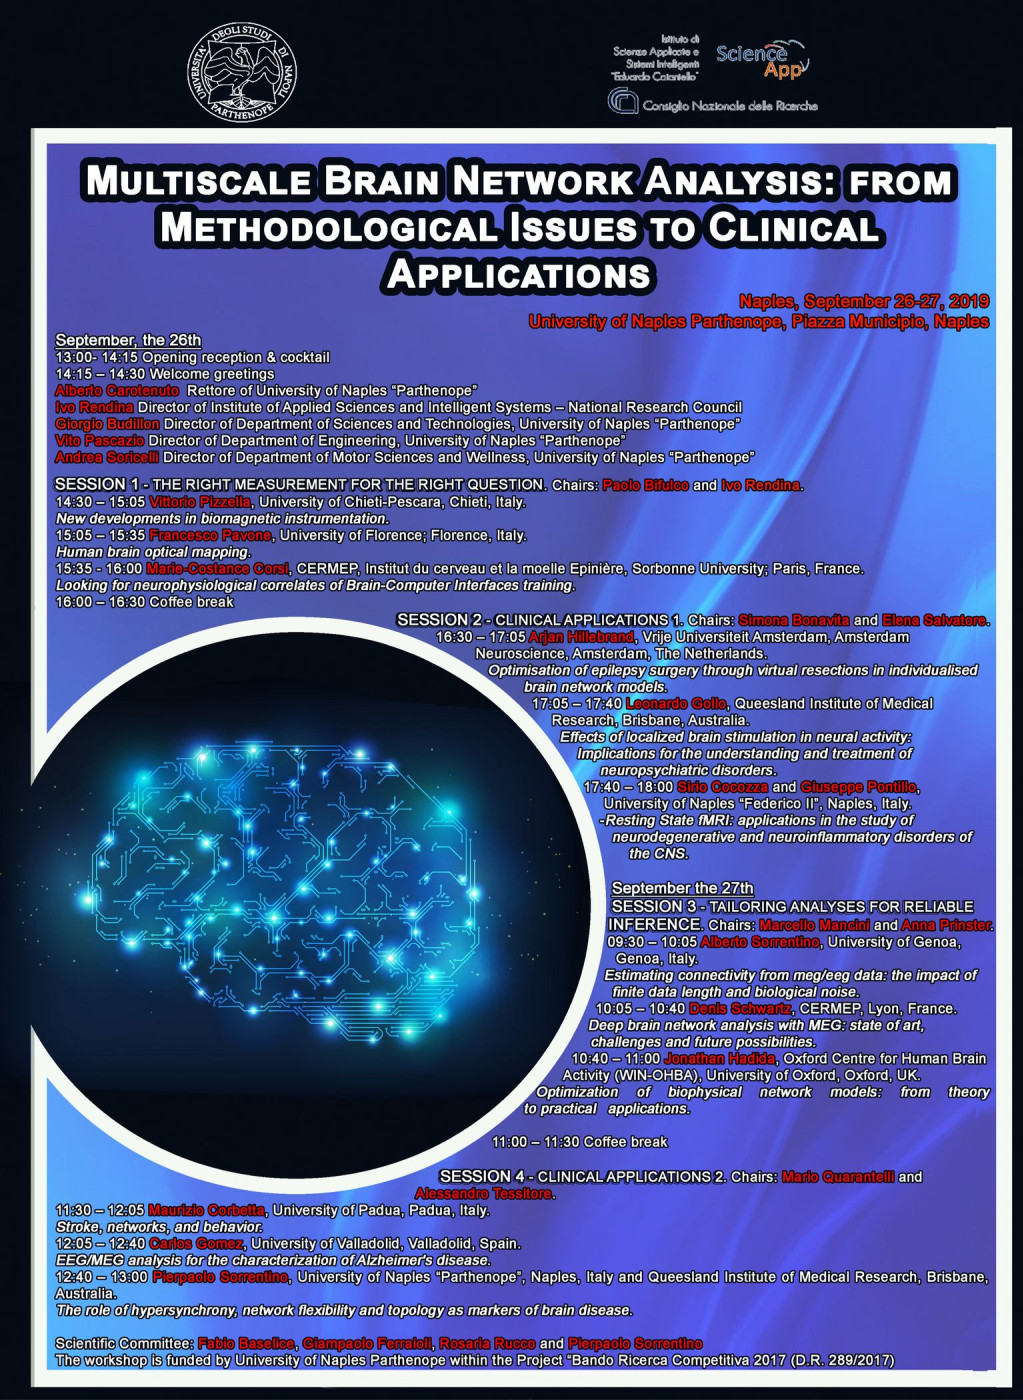 International Workshop: “Multiscale Brain Network Analysis: from methodological issues to clinical applications”